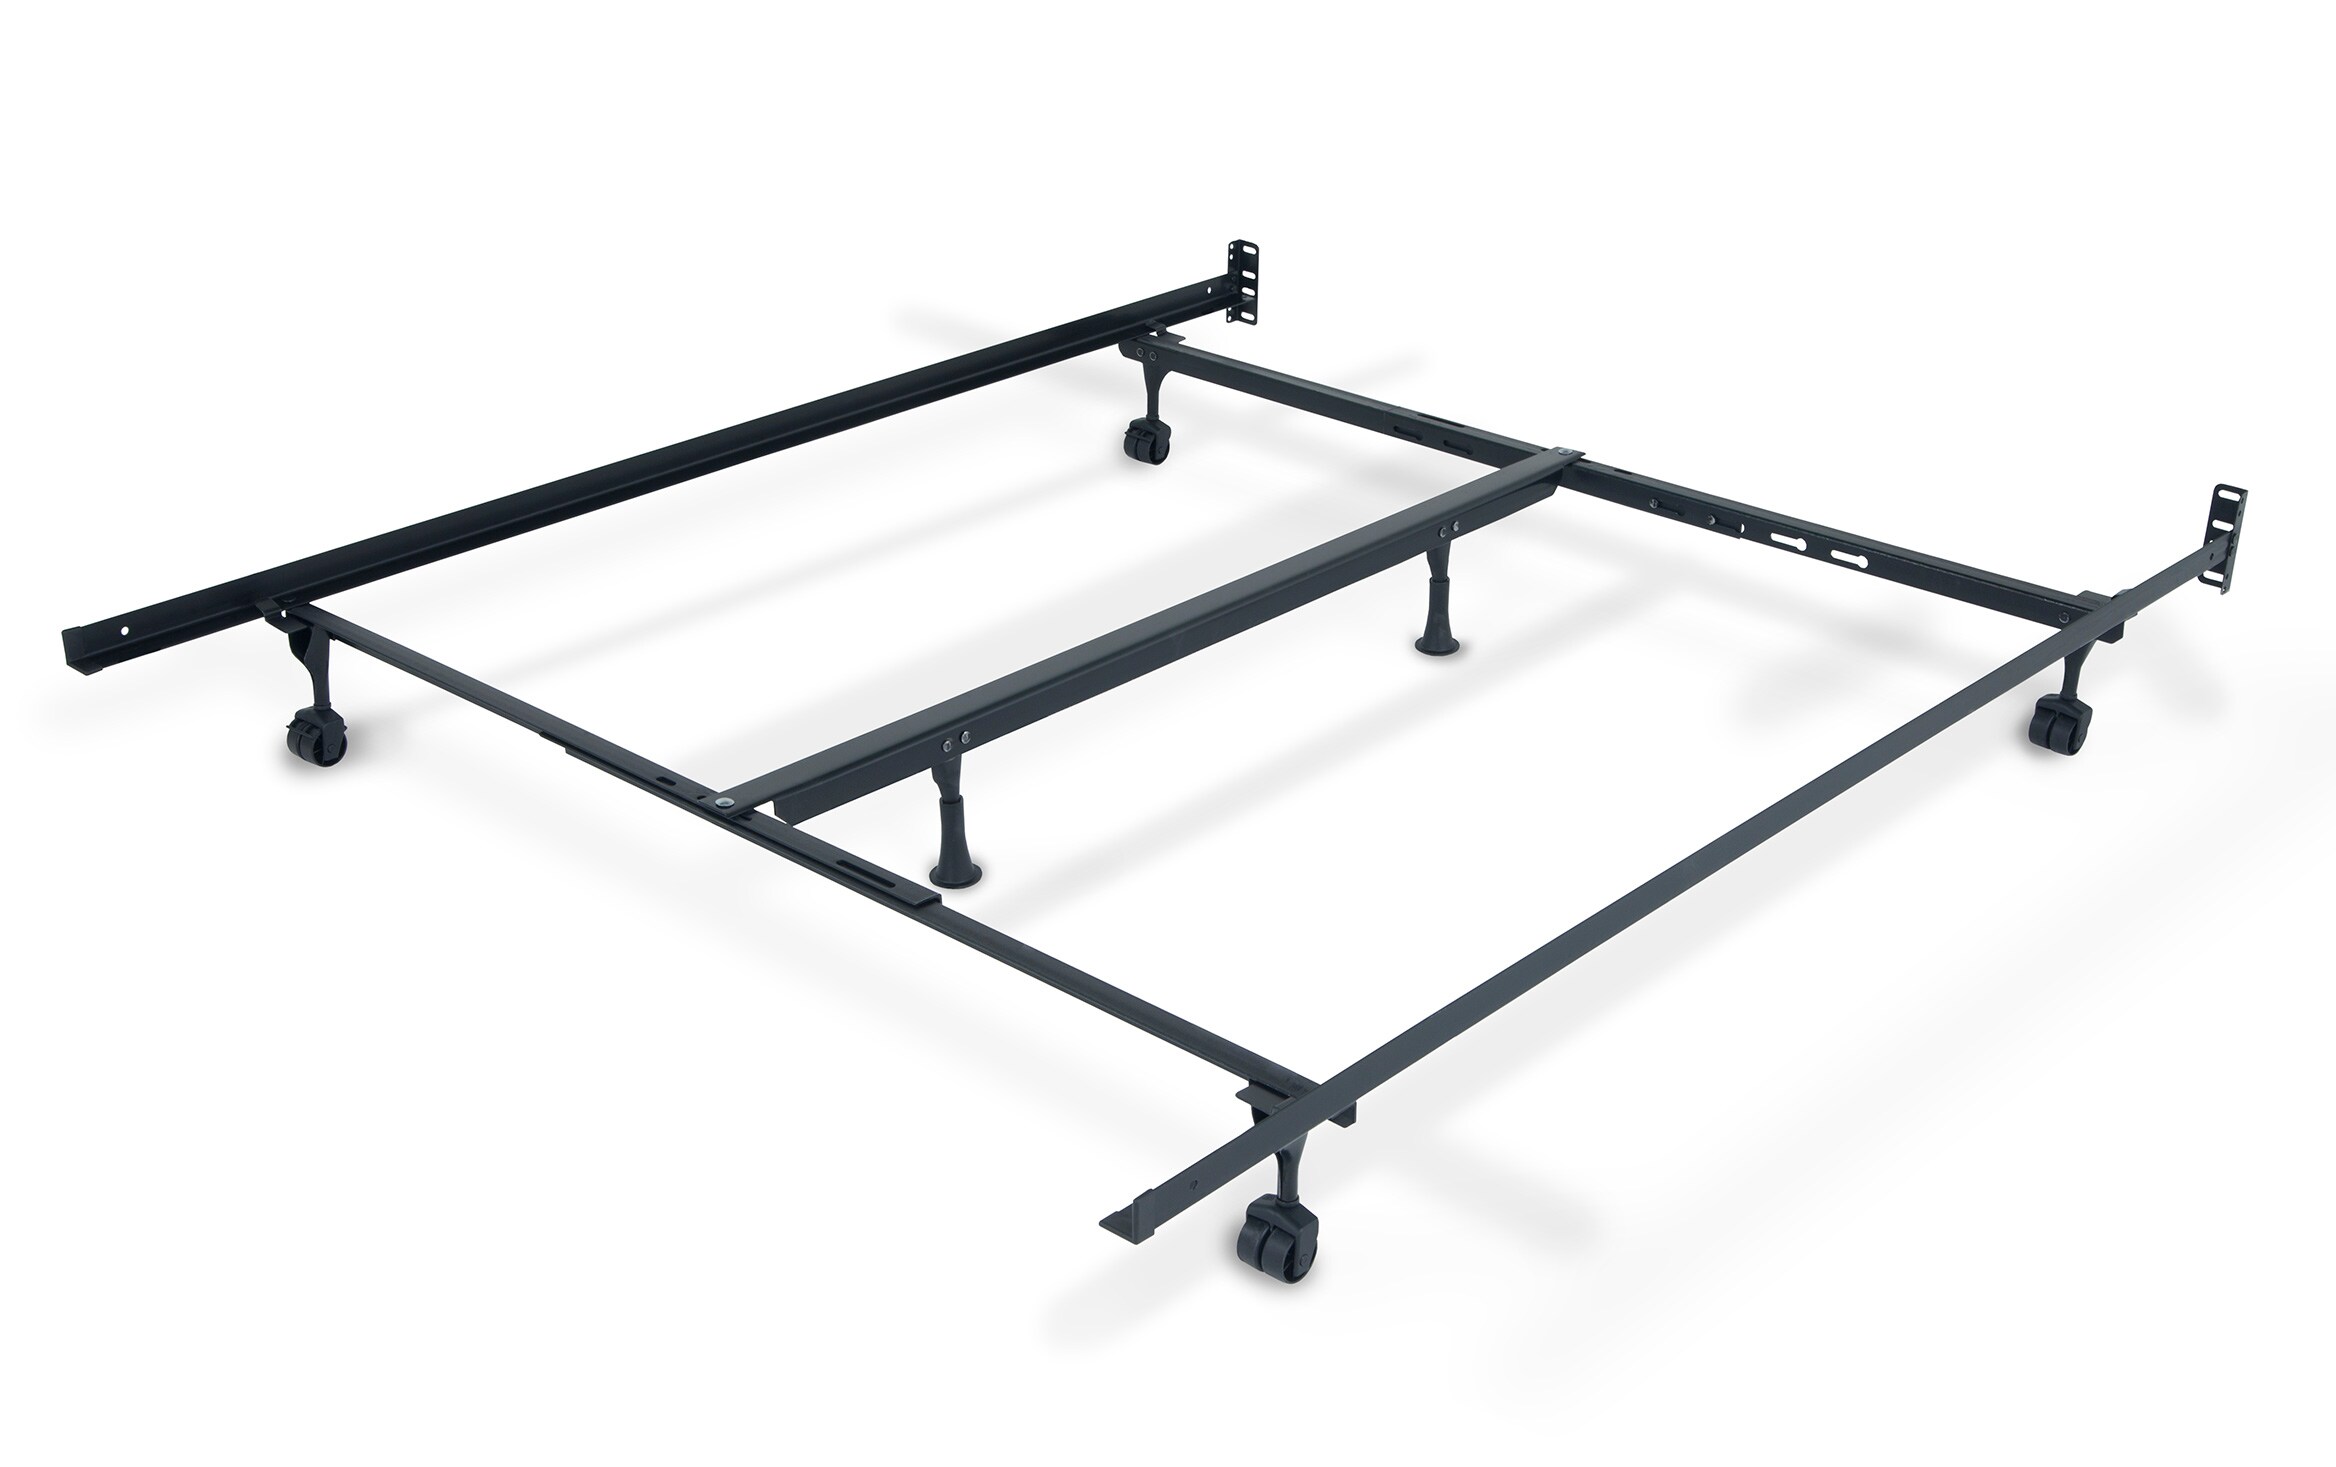 Queen King Bed Frame With Casters Bob, Basic King Bed Frame